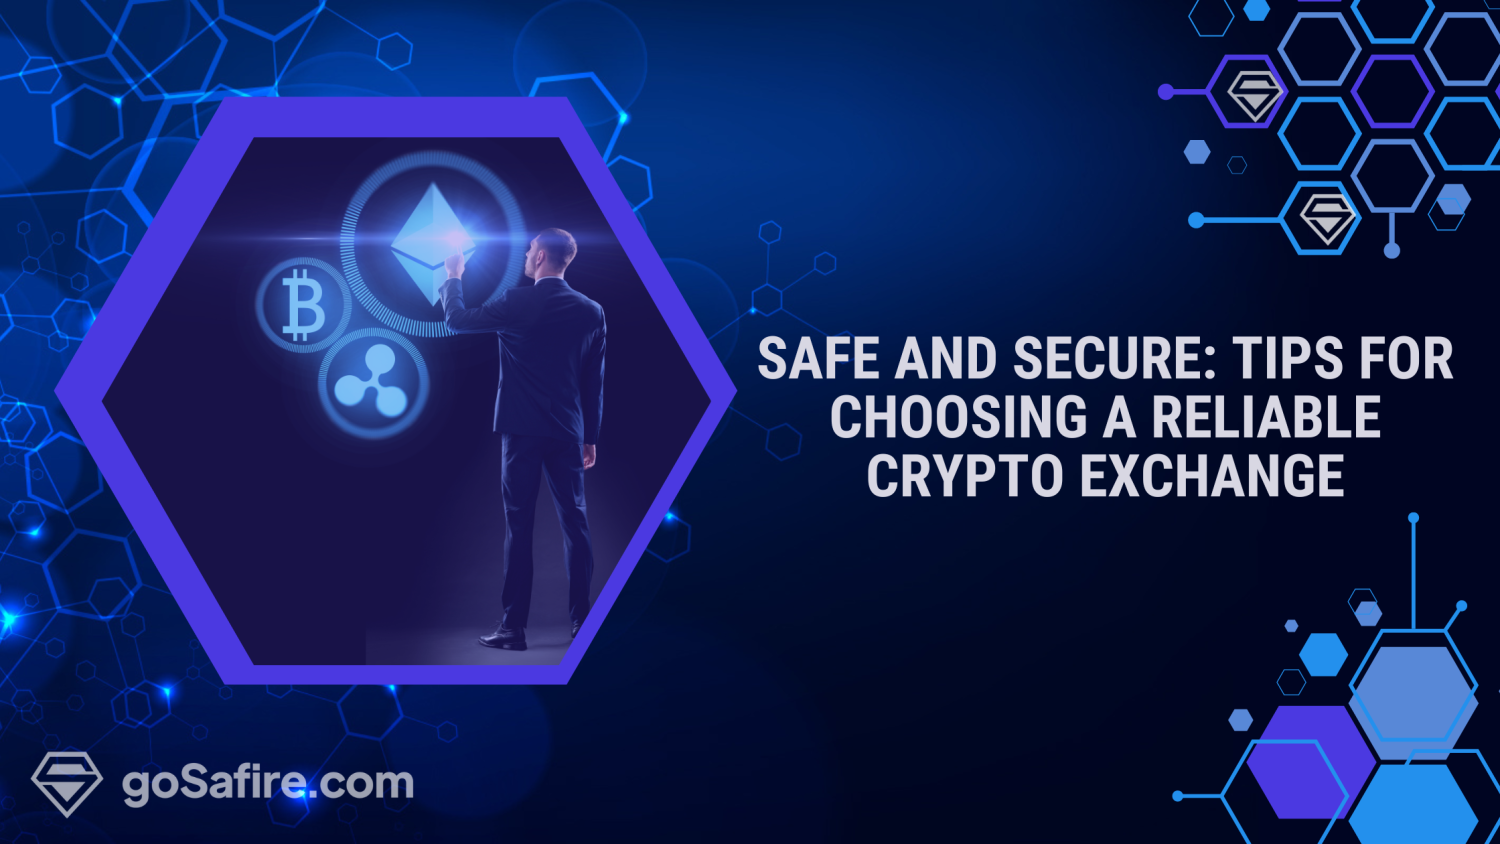 Safe and Secure: Tips for Choosing a Reliable Crypto Exchange